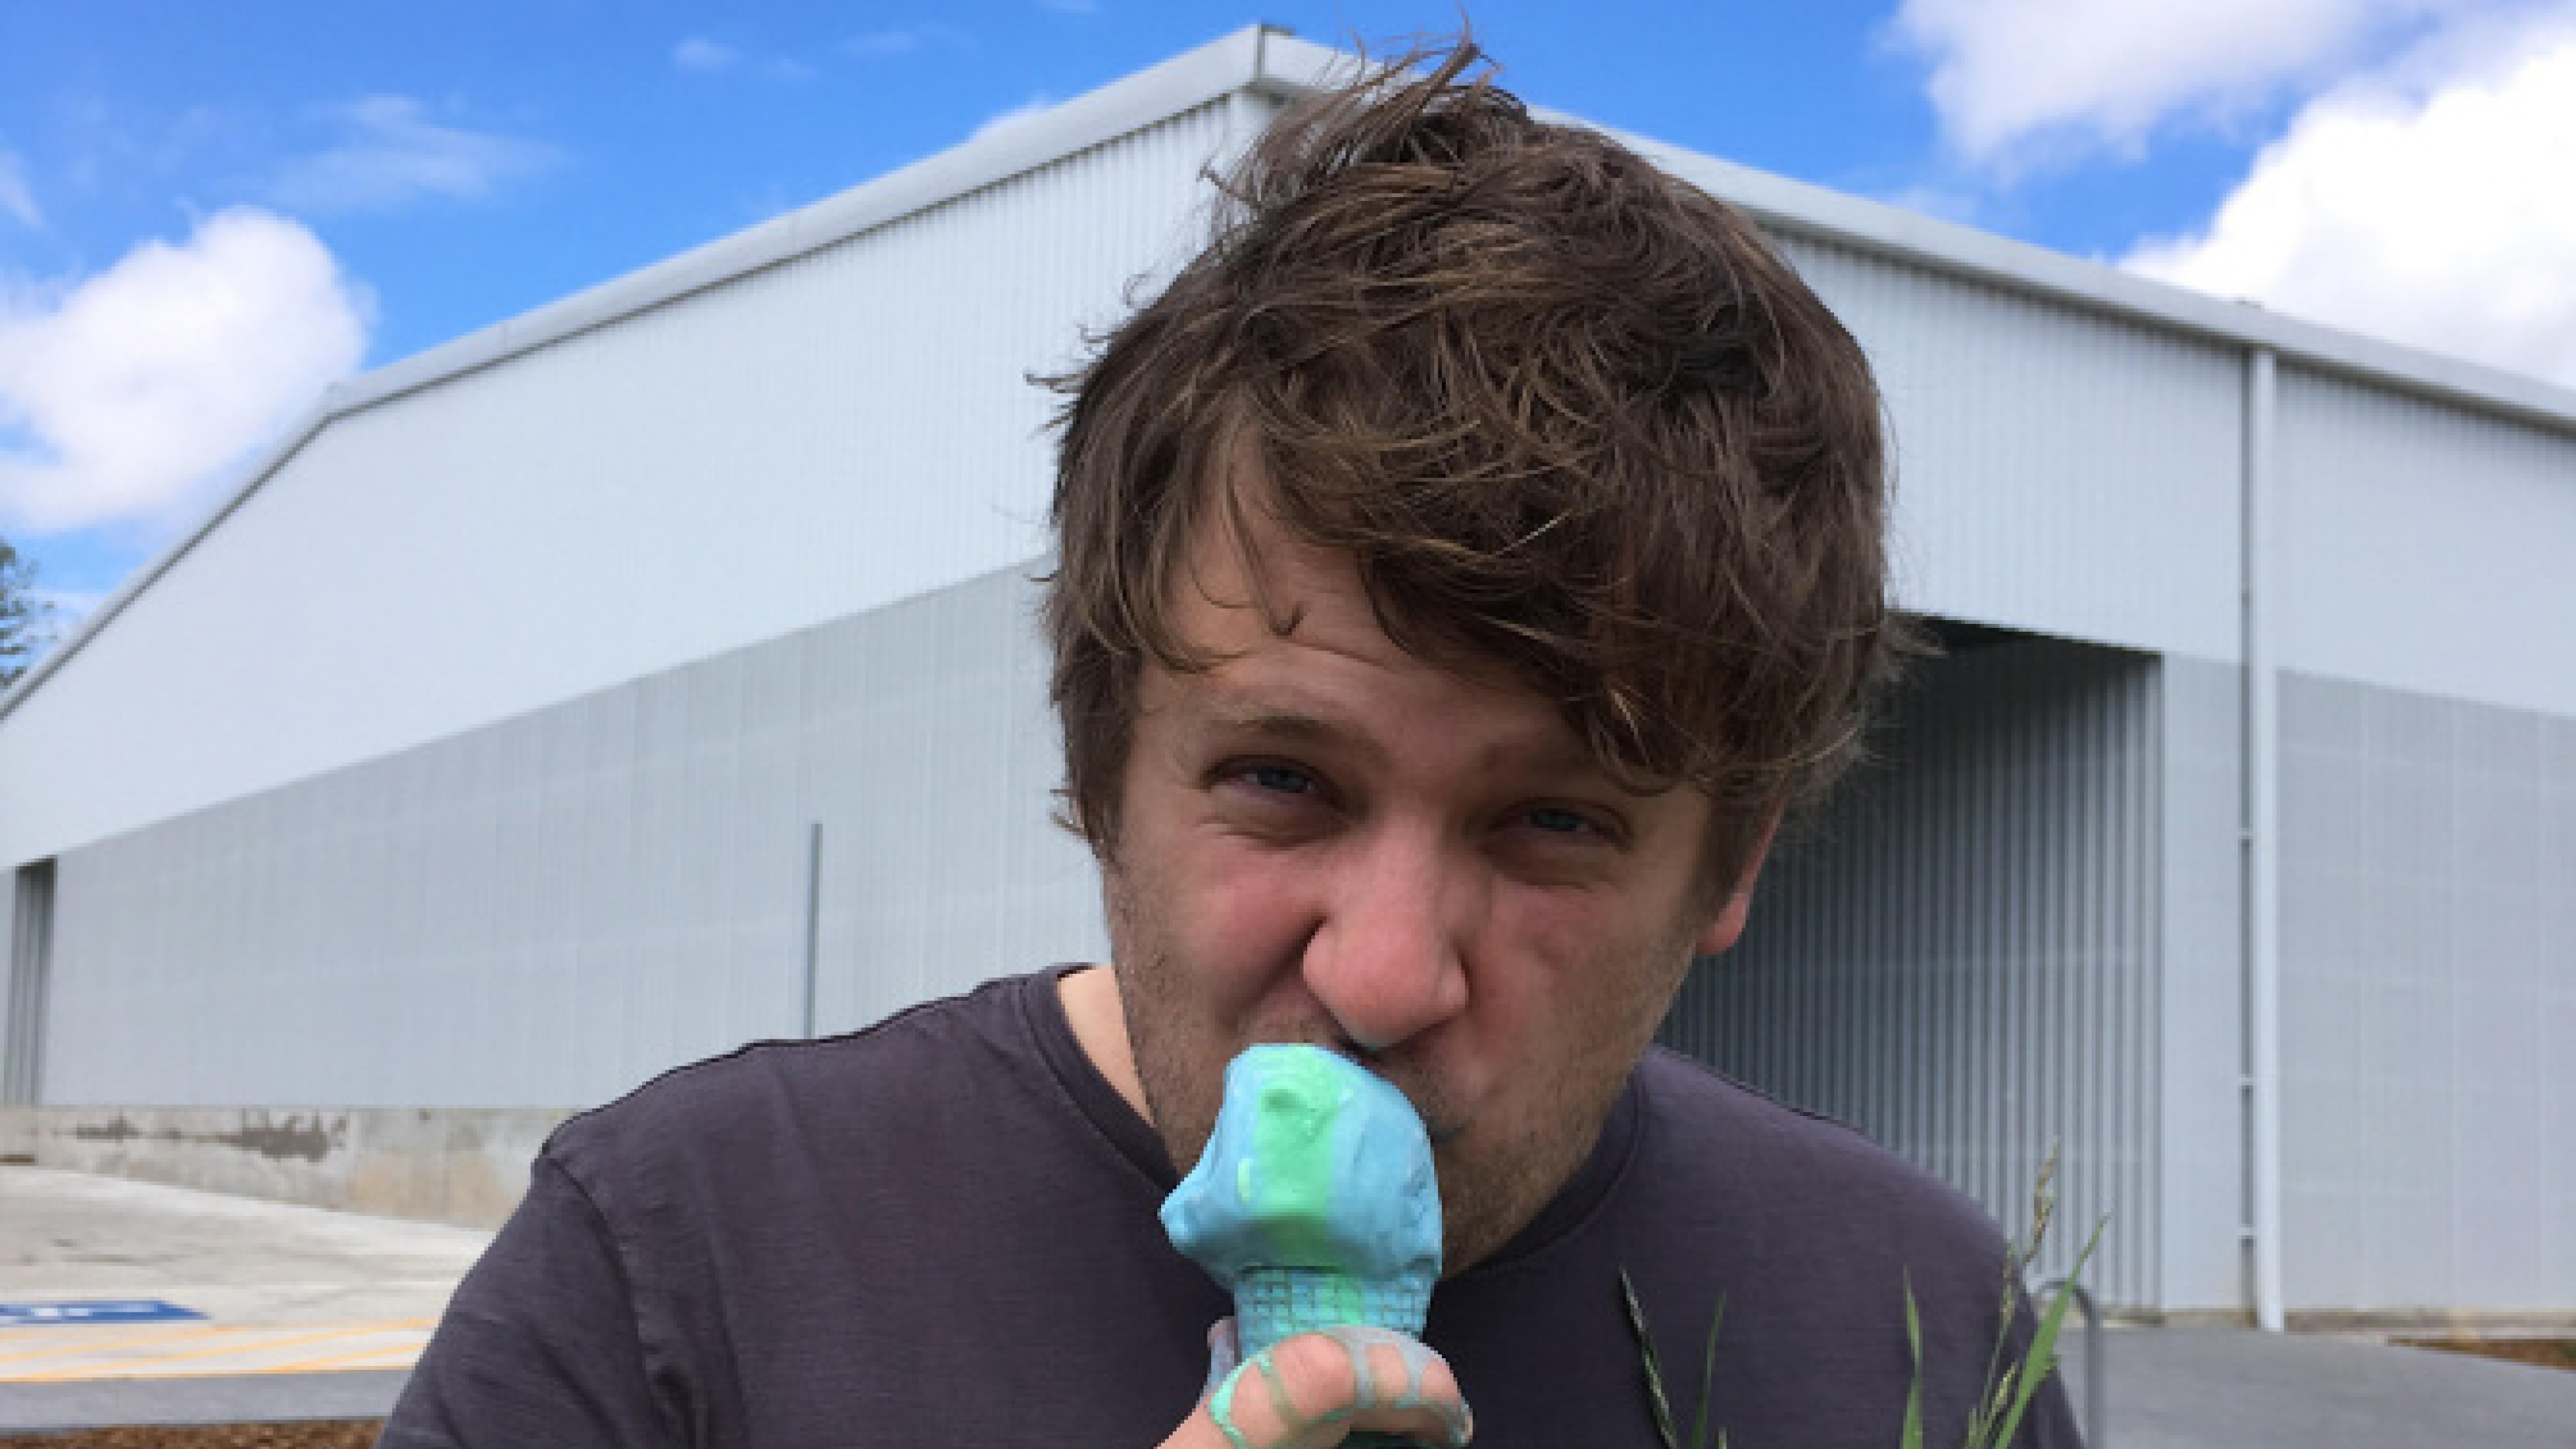 Alexander Hanson eats an ice cream cone in front of a large building outside.